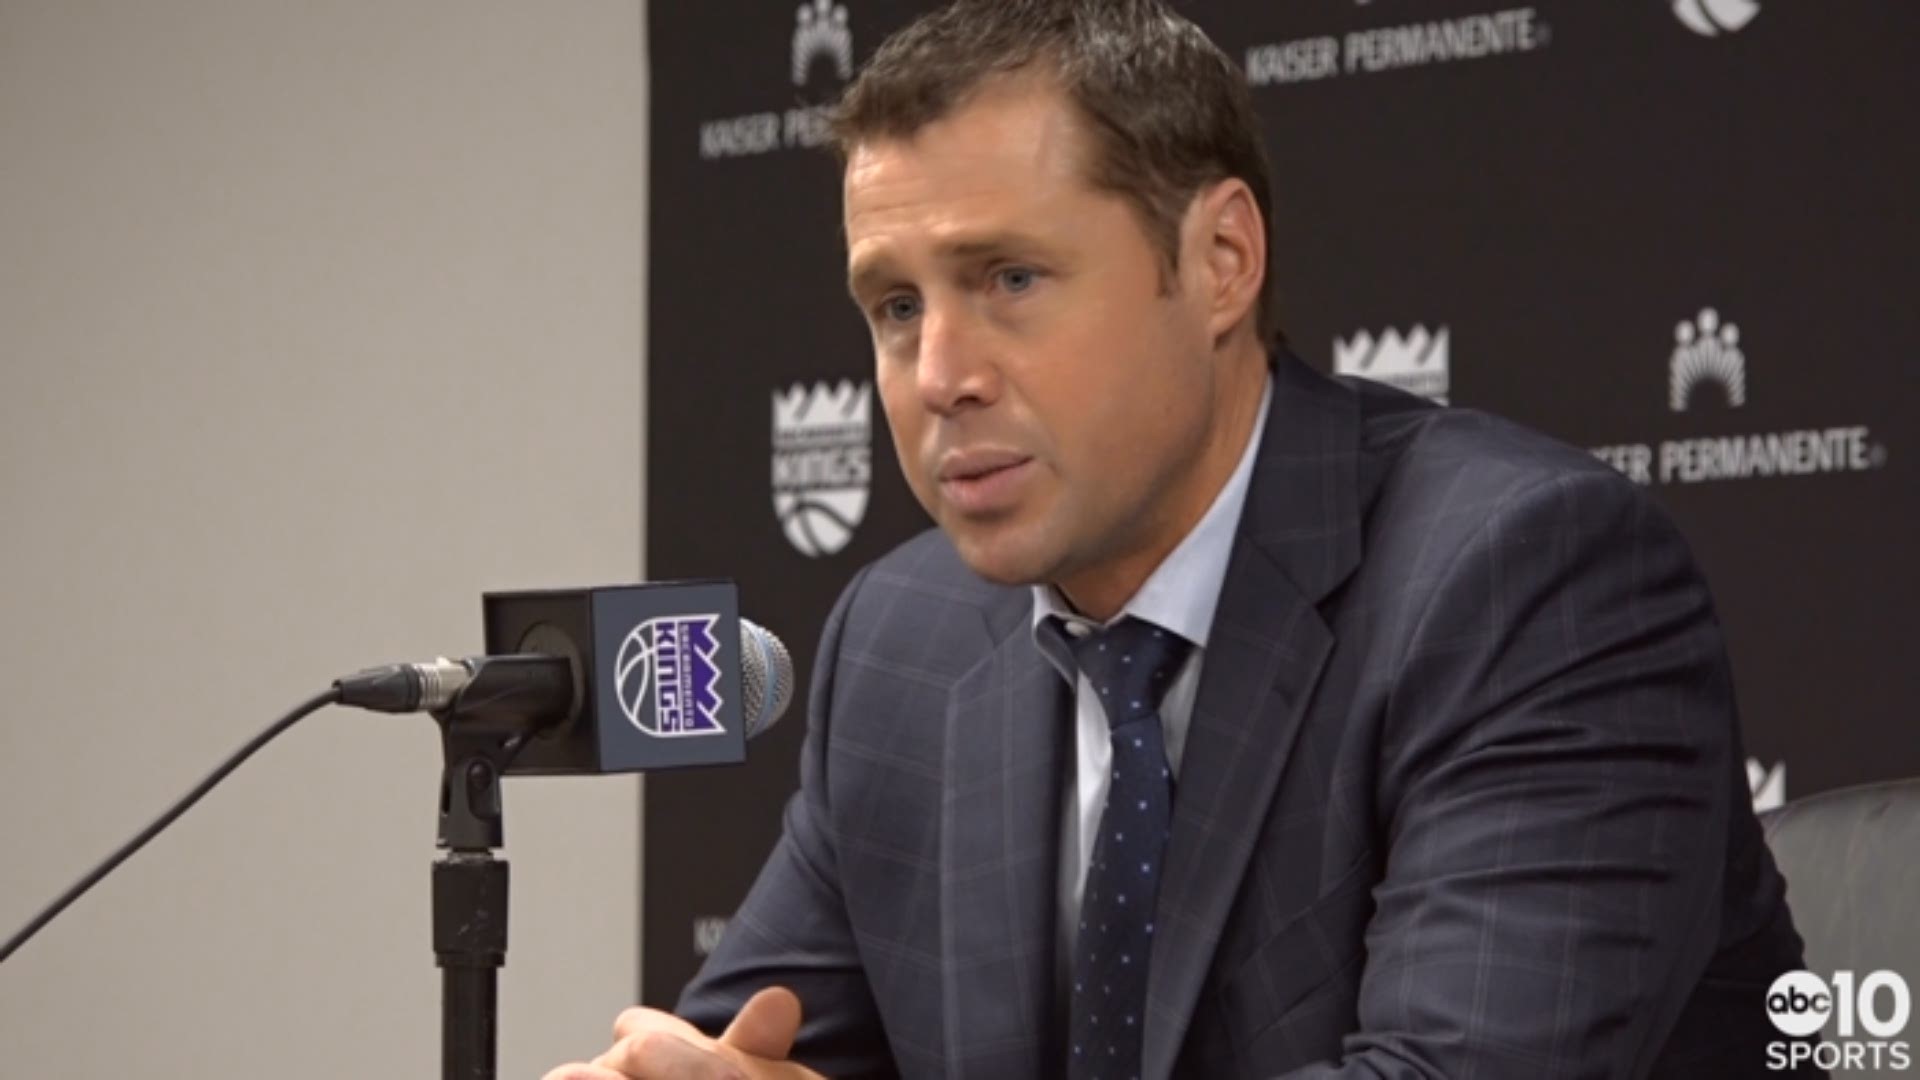 Kings head coach Dave Joerger discusses Friday night's loss to the Golden State Warriors, why he didn't call a timeout in the closing seconds of play and his team's troubles defending.